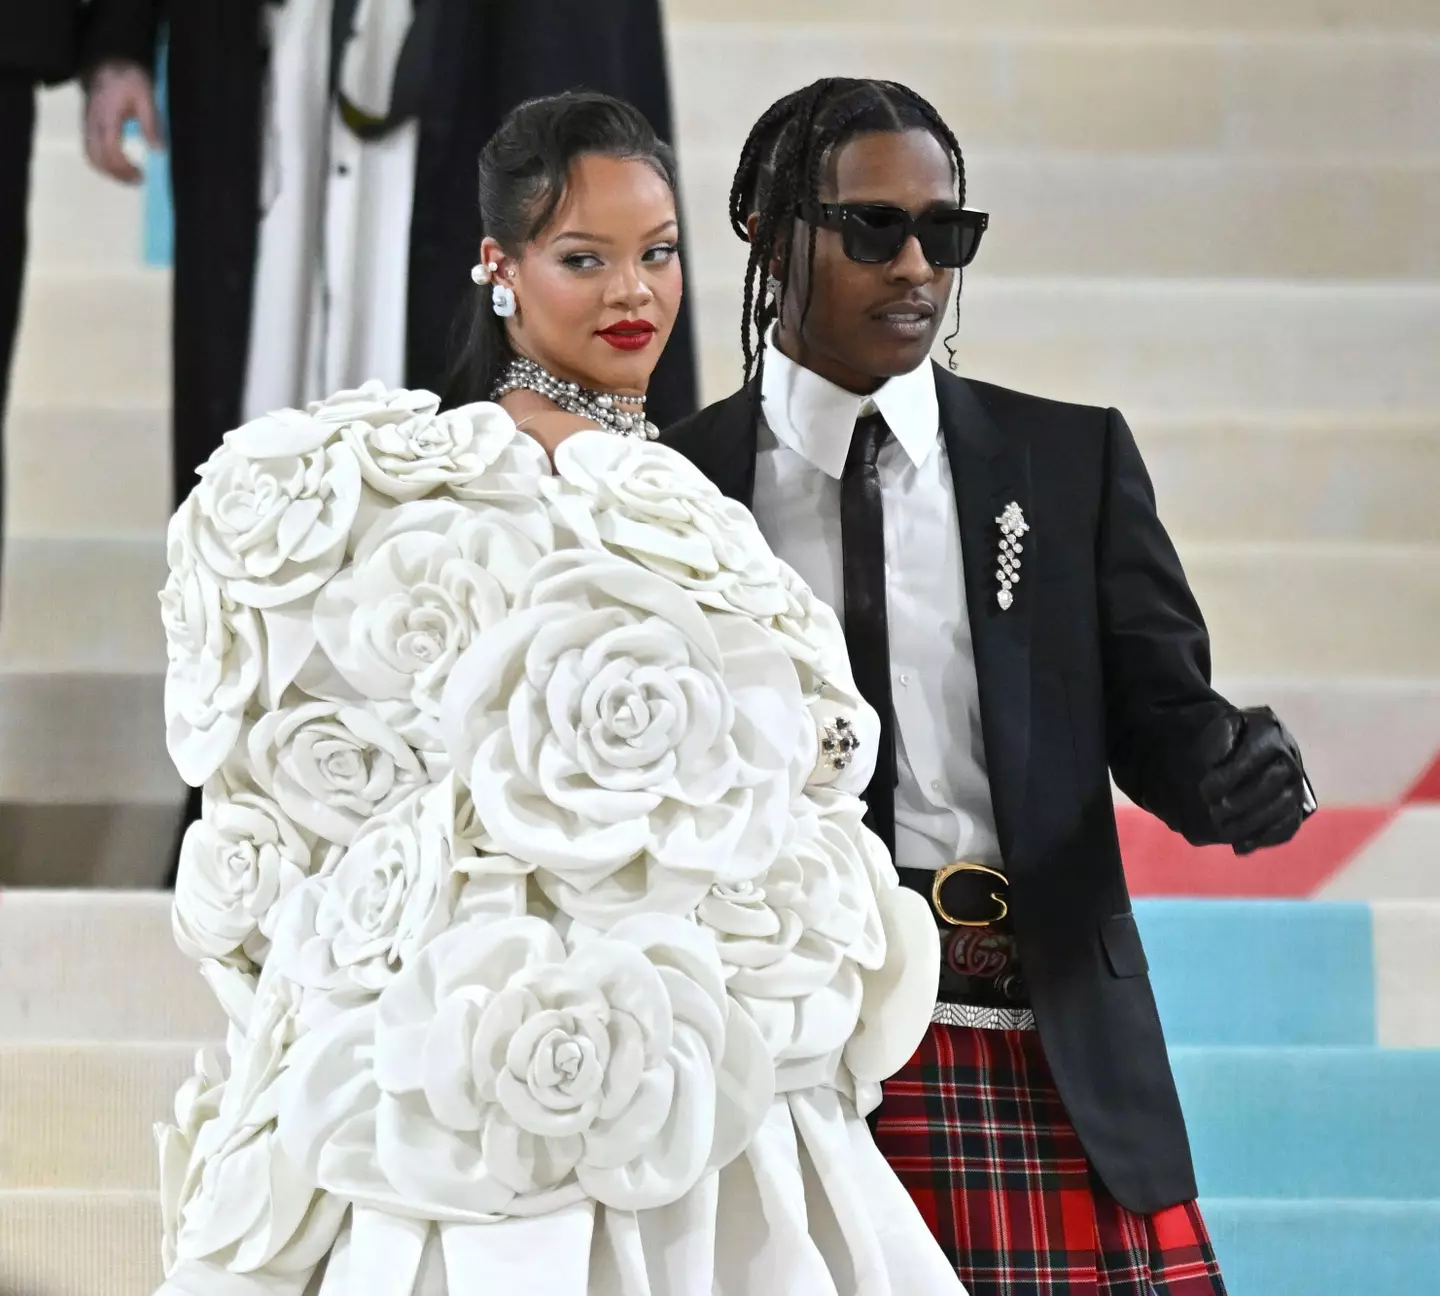 Rihanna and A$AP Rocky have named their son after a legendary Wu-Tang rapper.